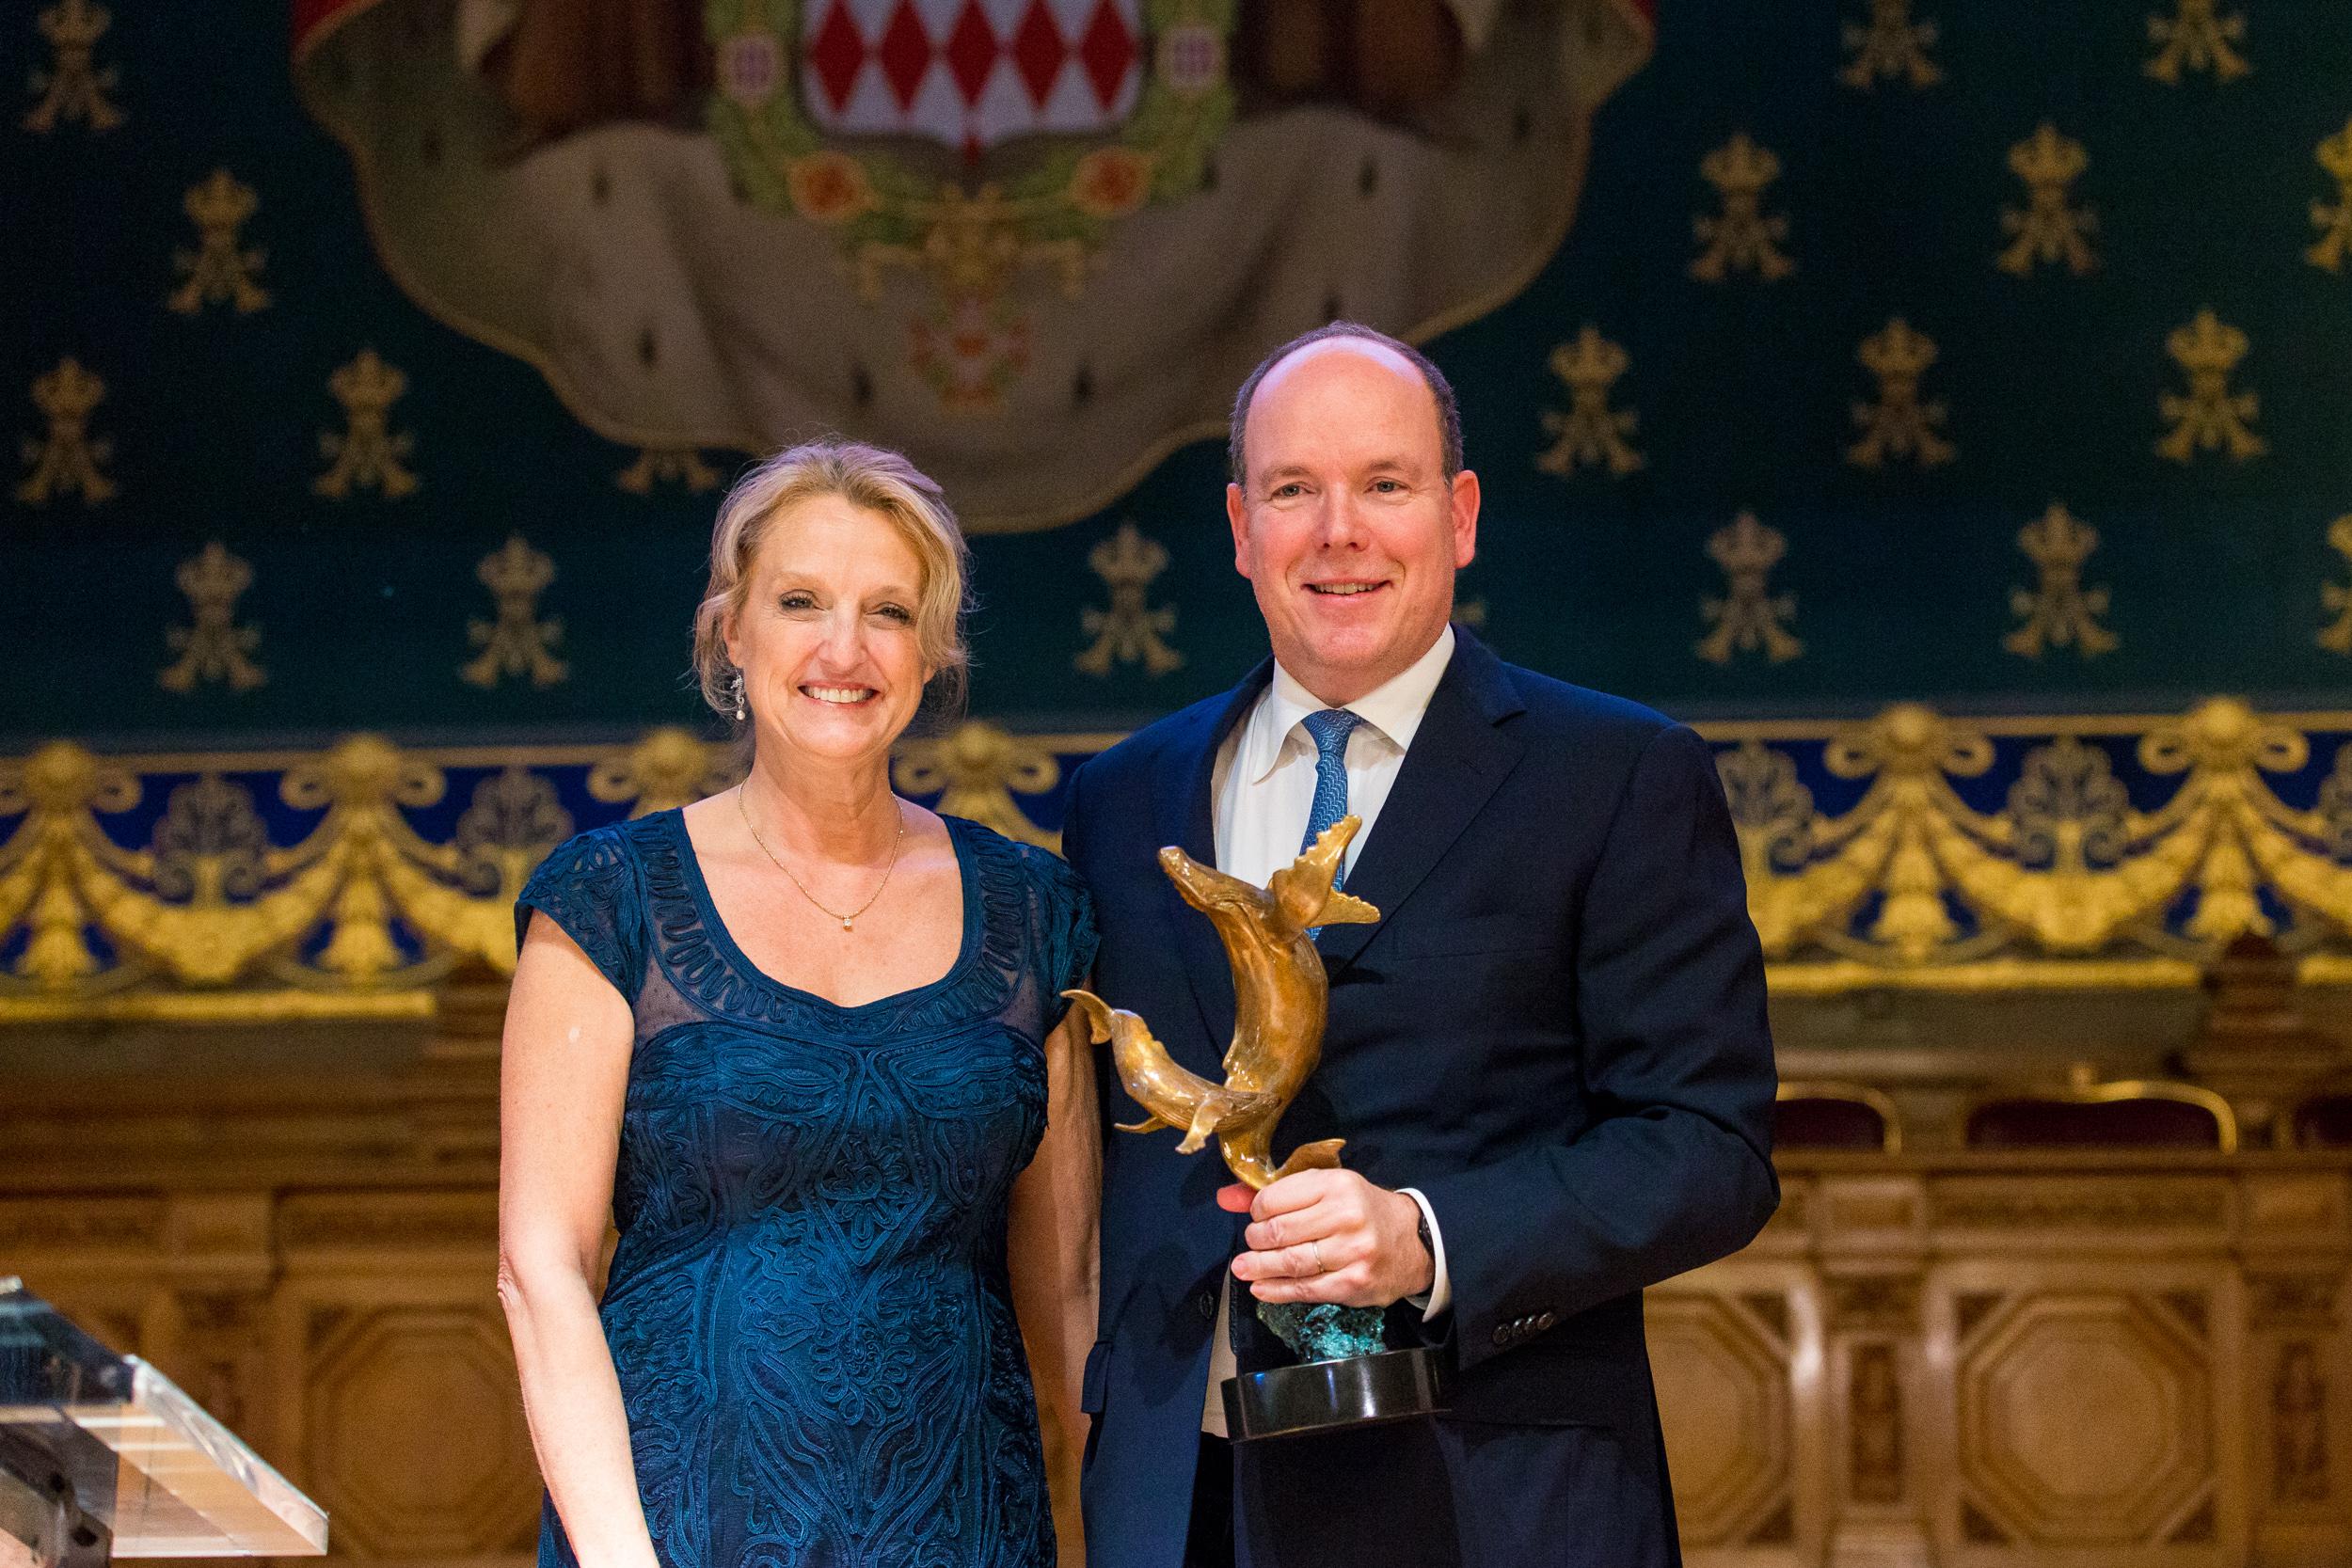 Debbie Kinder, CEO and founder of BLUE and HSH Prince Albert II of Monaco